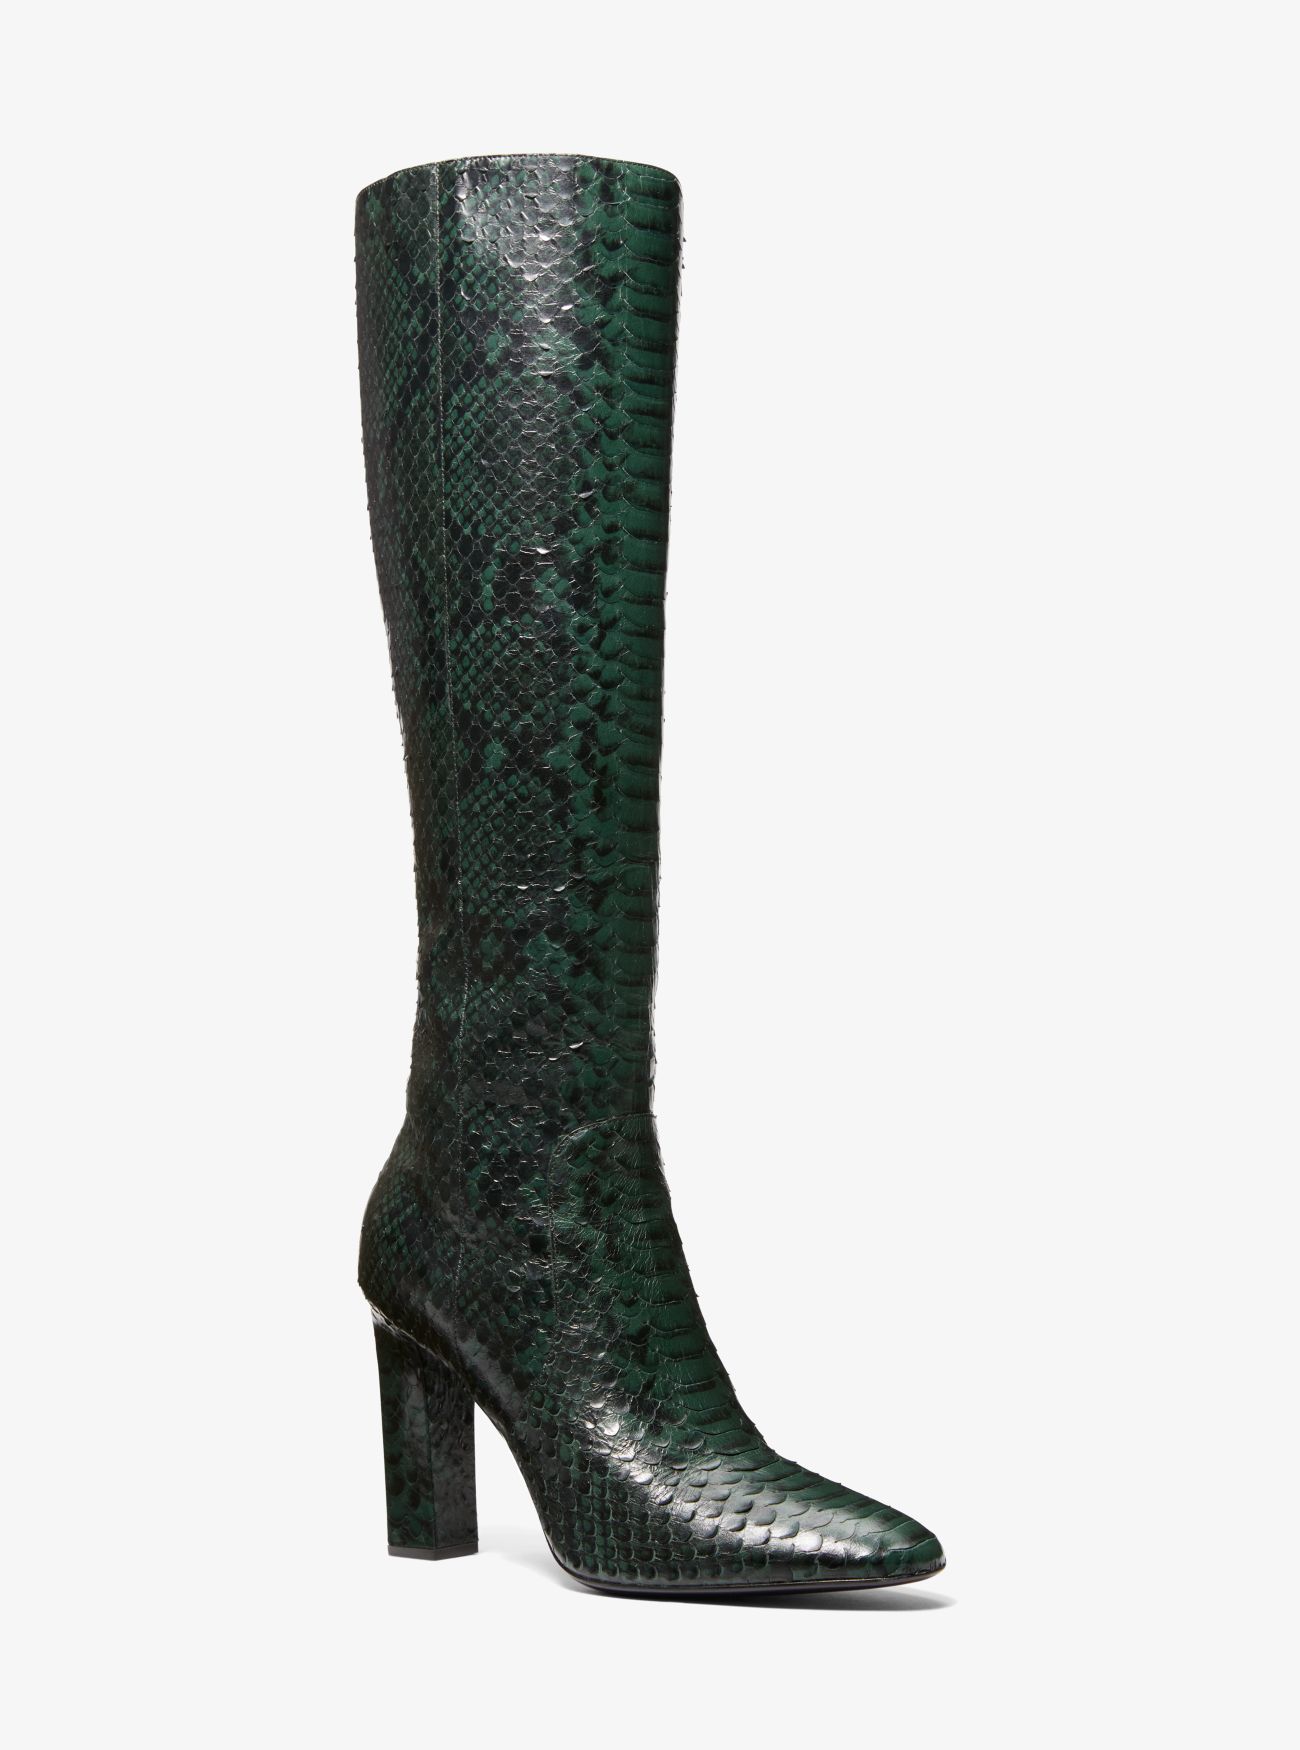 MK Carly Python Embossed Leather Boot - Green - Michael Kors